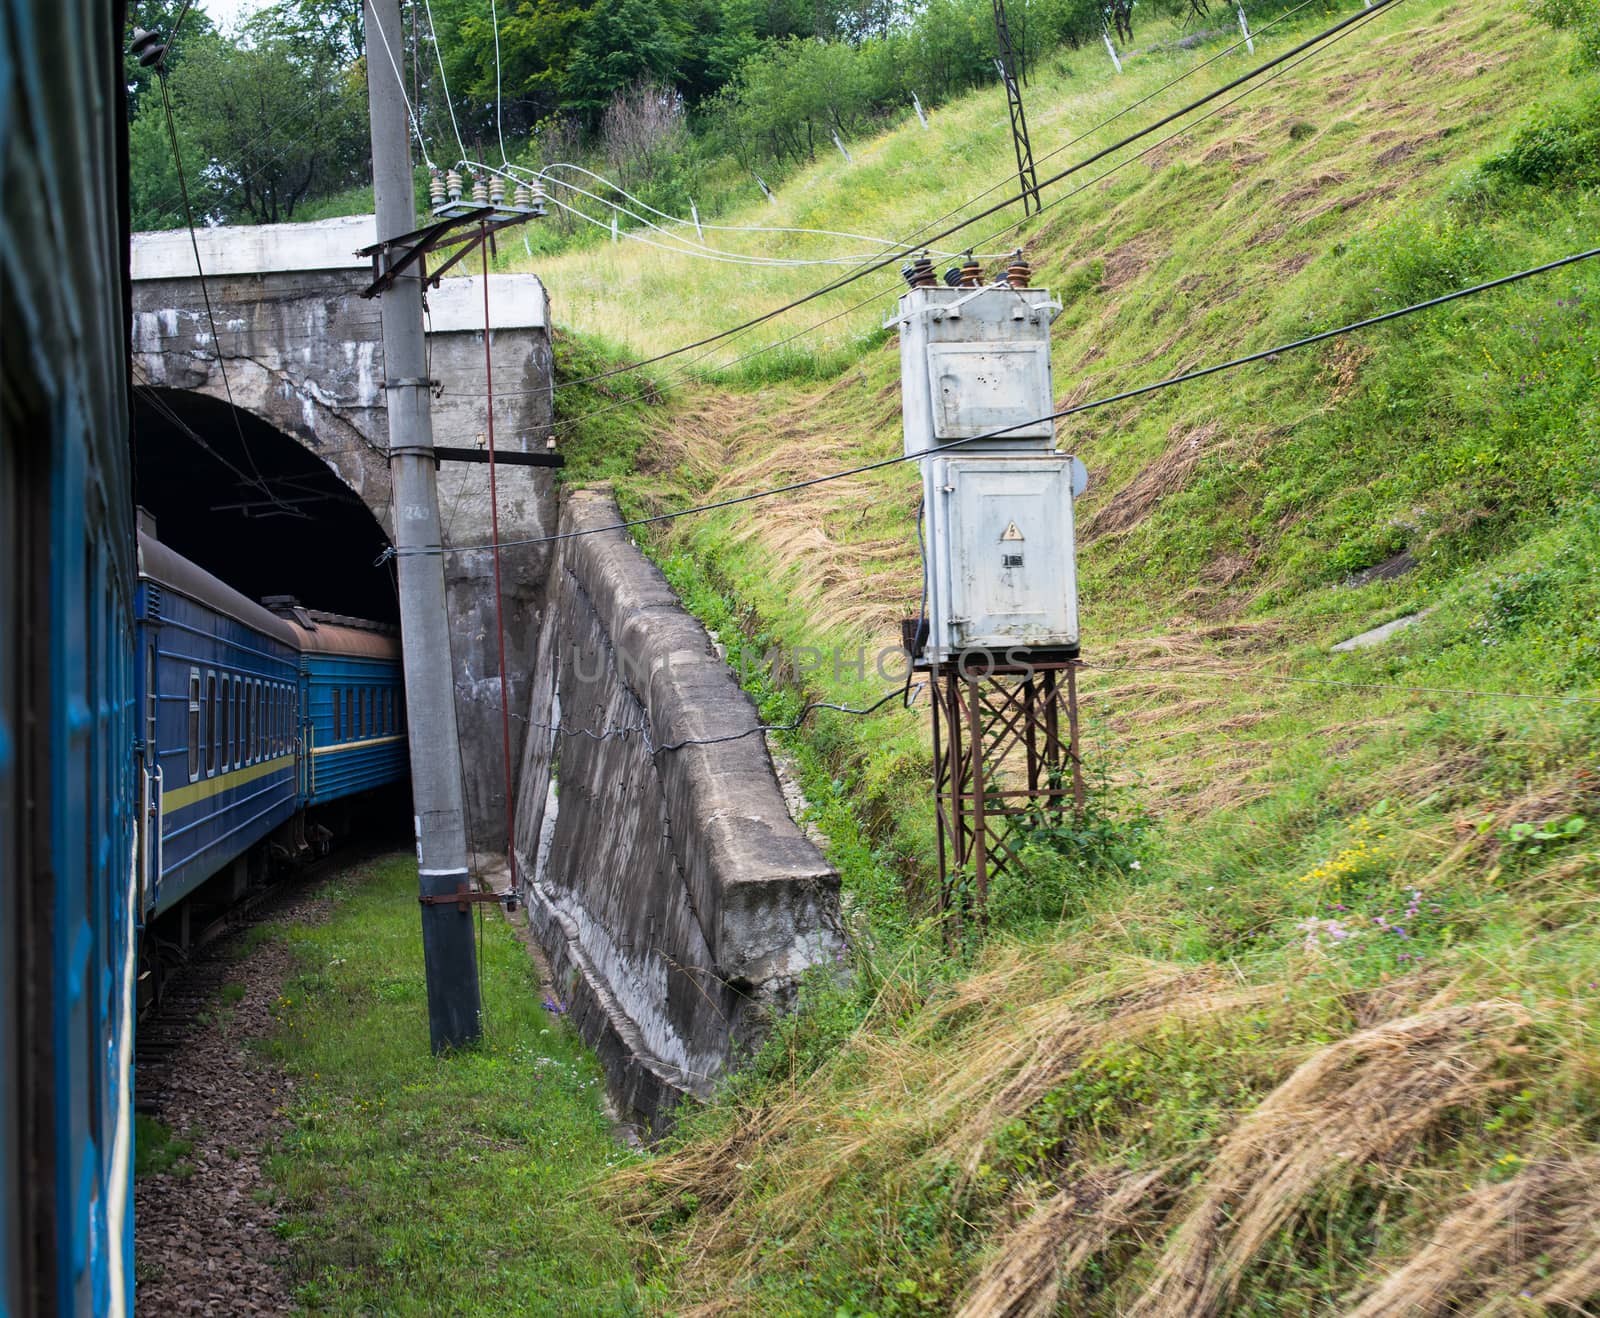 Passenger train going into the tunnel in the Carpathian Mountains